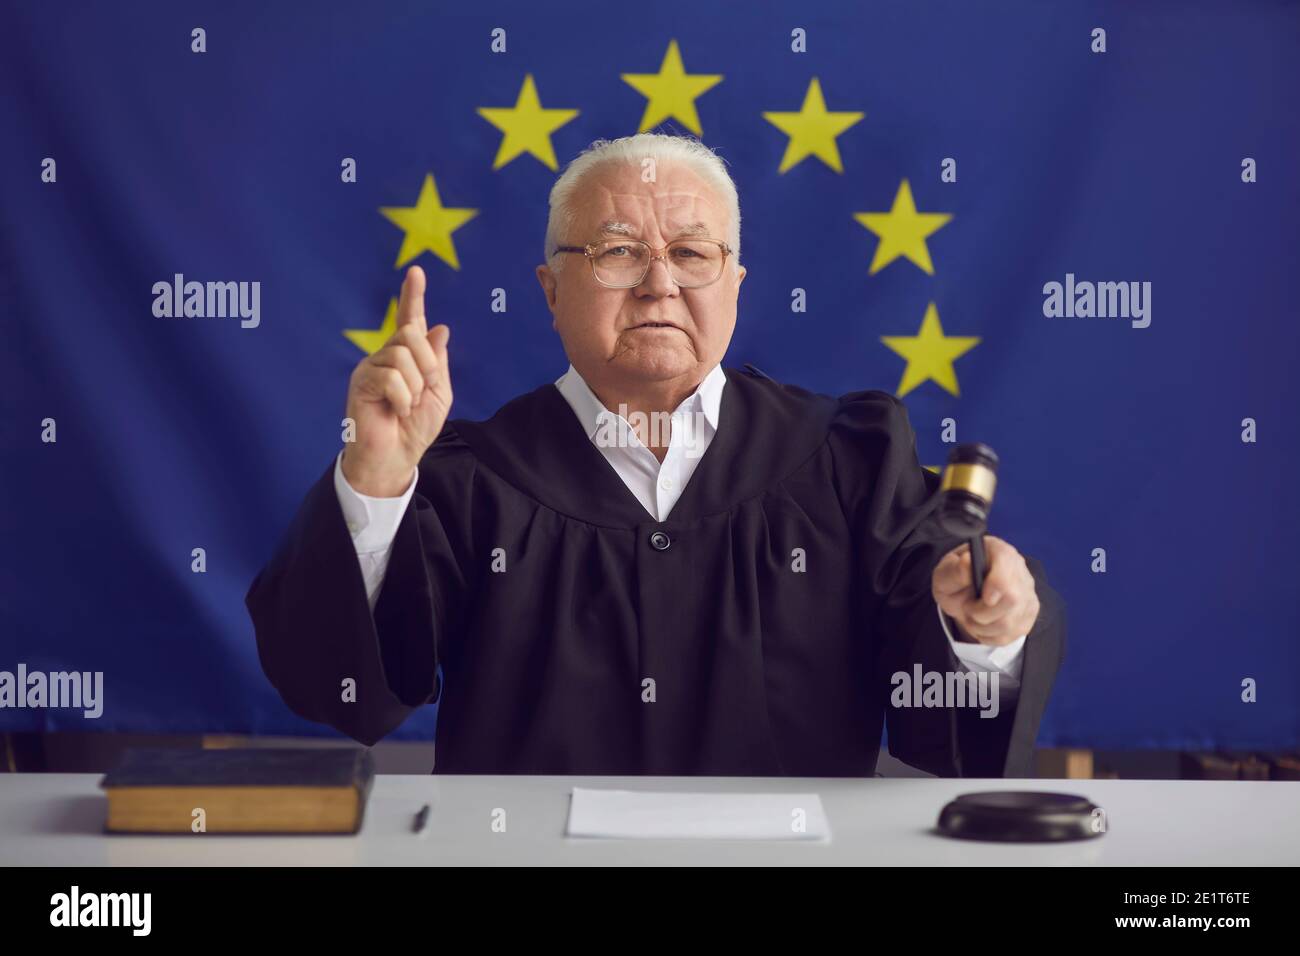 Serious judge of European Court of Justice holding gavel and pronouncing sentence Stock Photo